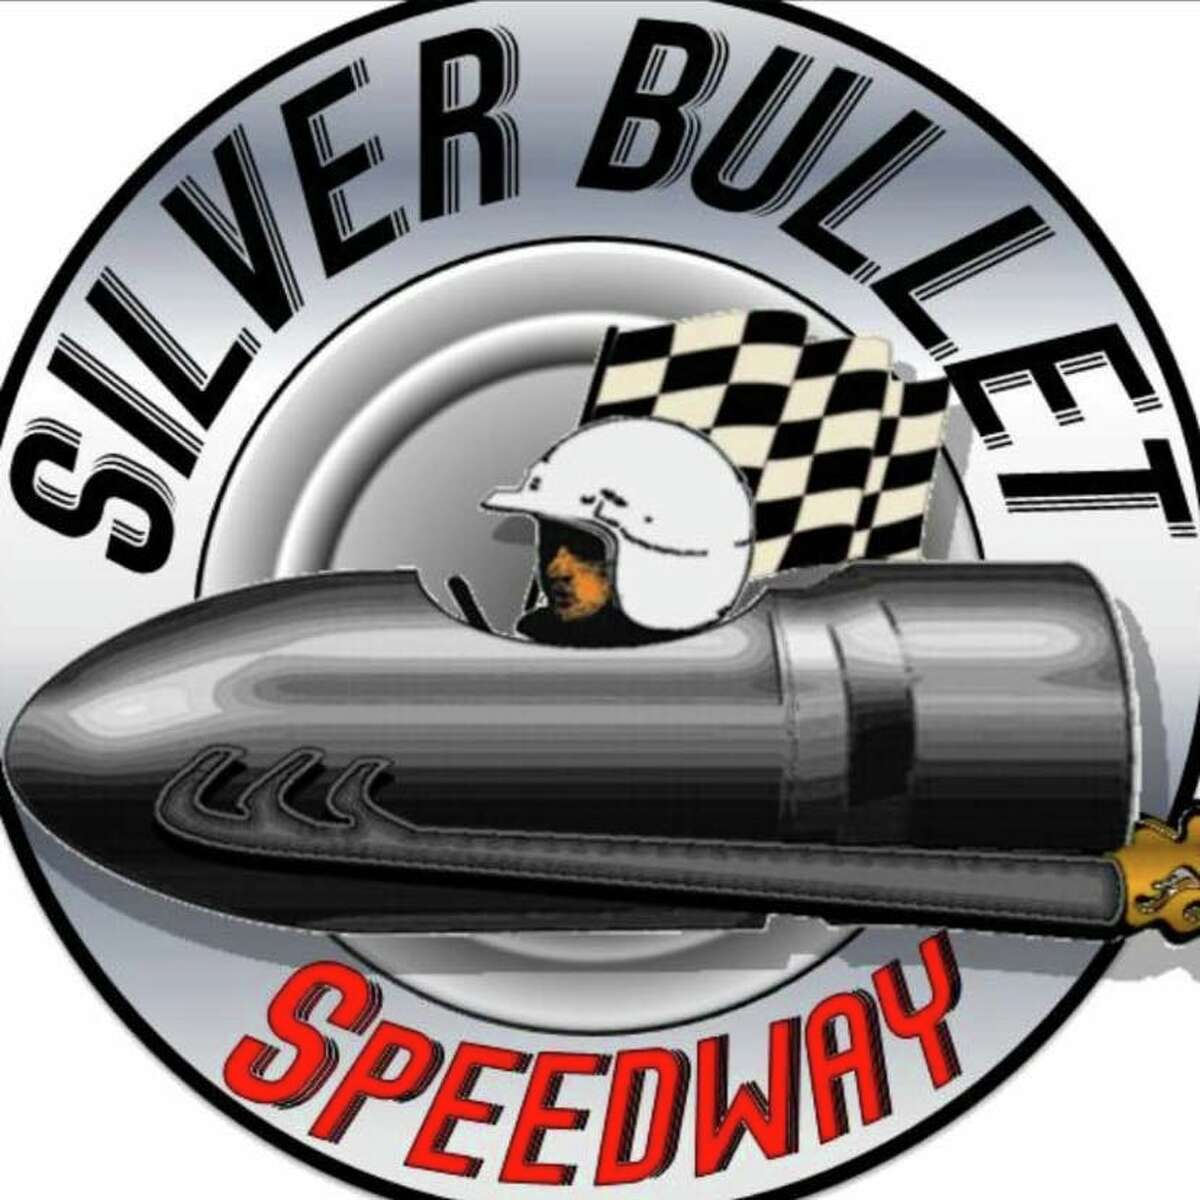 Races are held each Saturday except Aug. 20 at the Silver Bullet Speedway in Owendale.